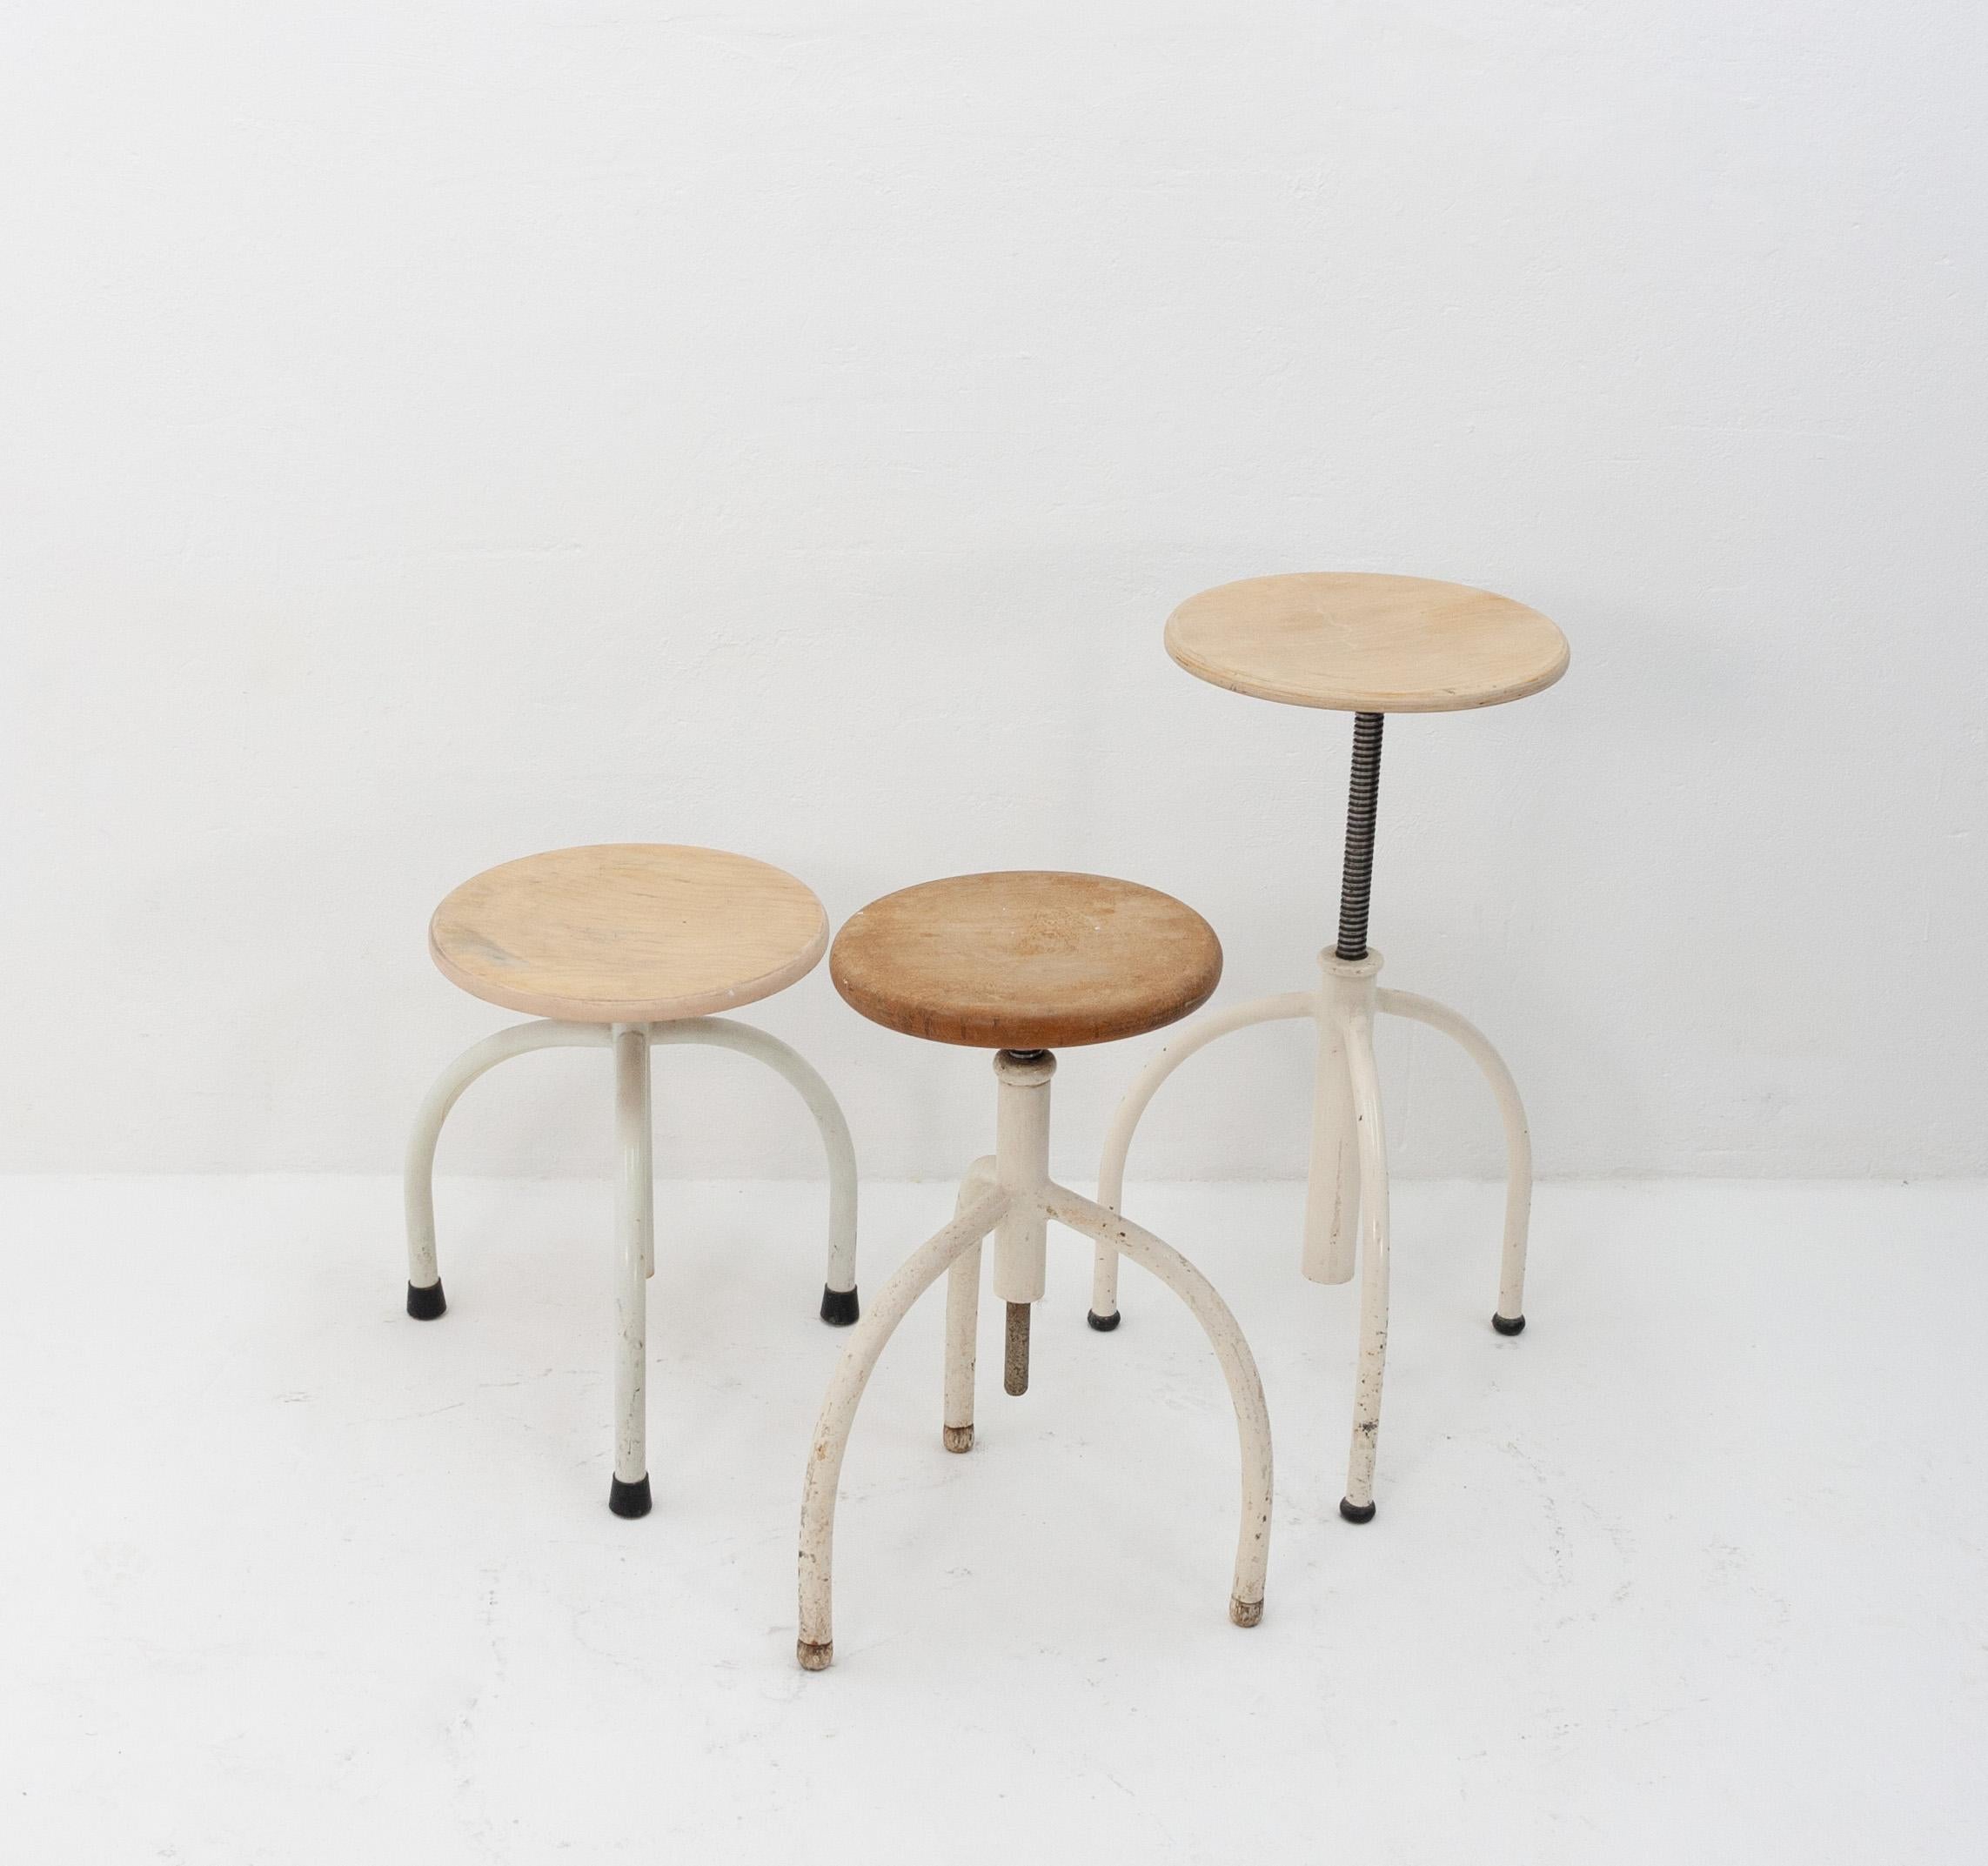 Three Oostwoud Franeker Holland, medical stools. Adjustable in height, Metal frame with solid wood top, 1950s. Was used in hospitals. Three leg stools. One is a little older. Good working condition.
   